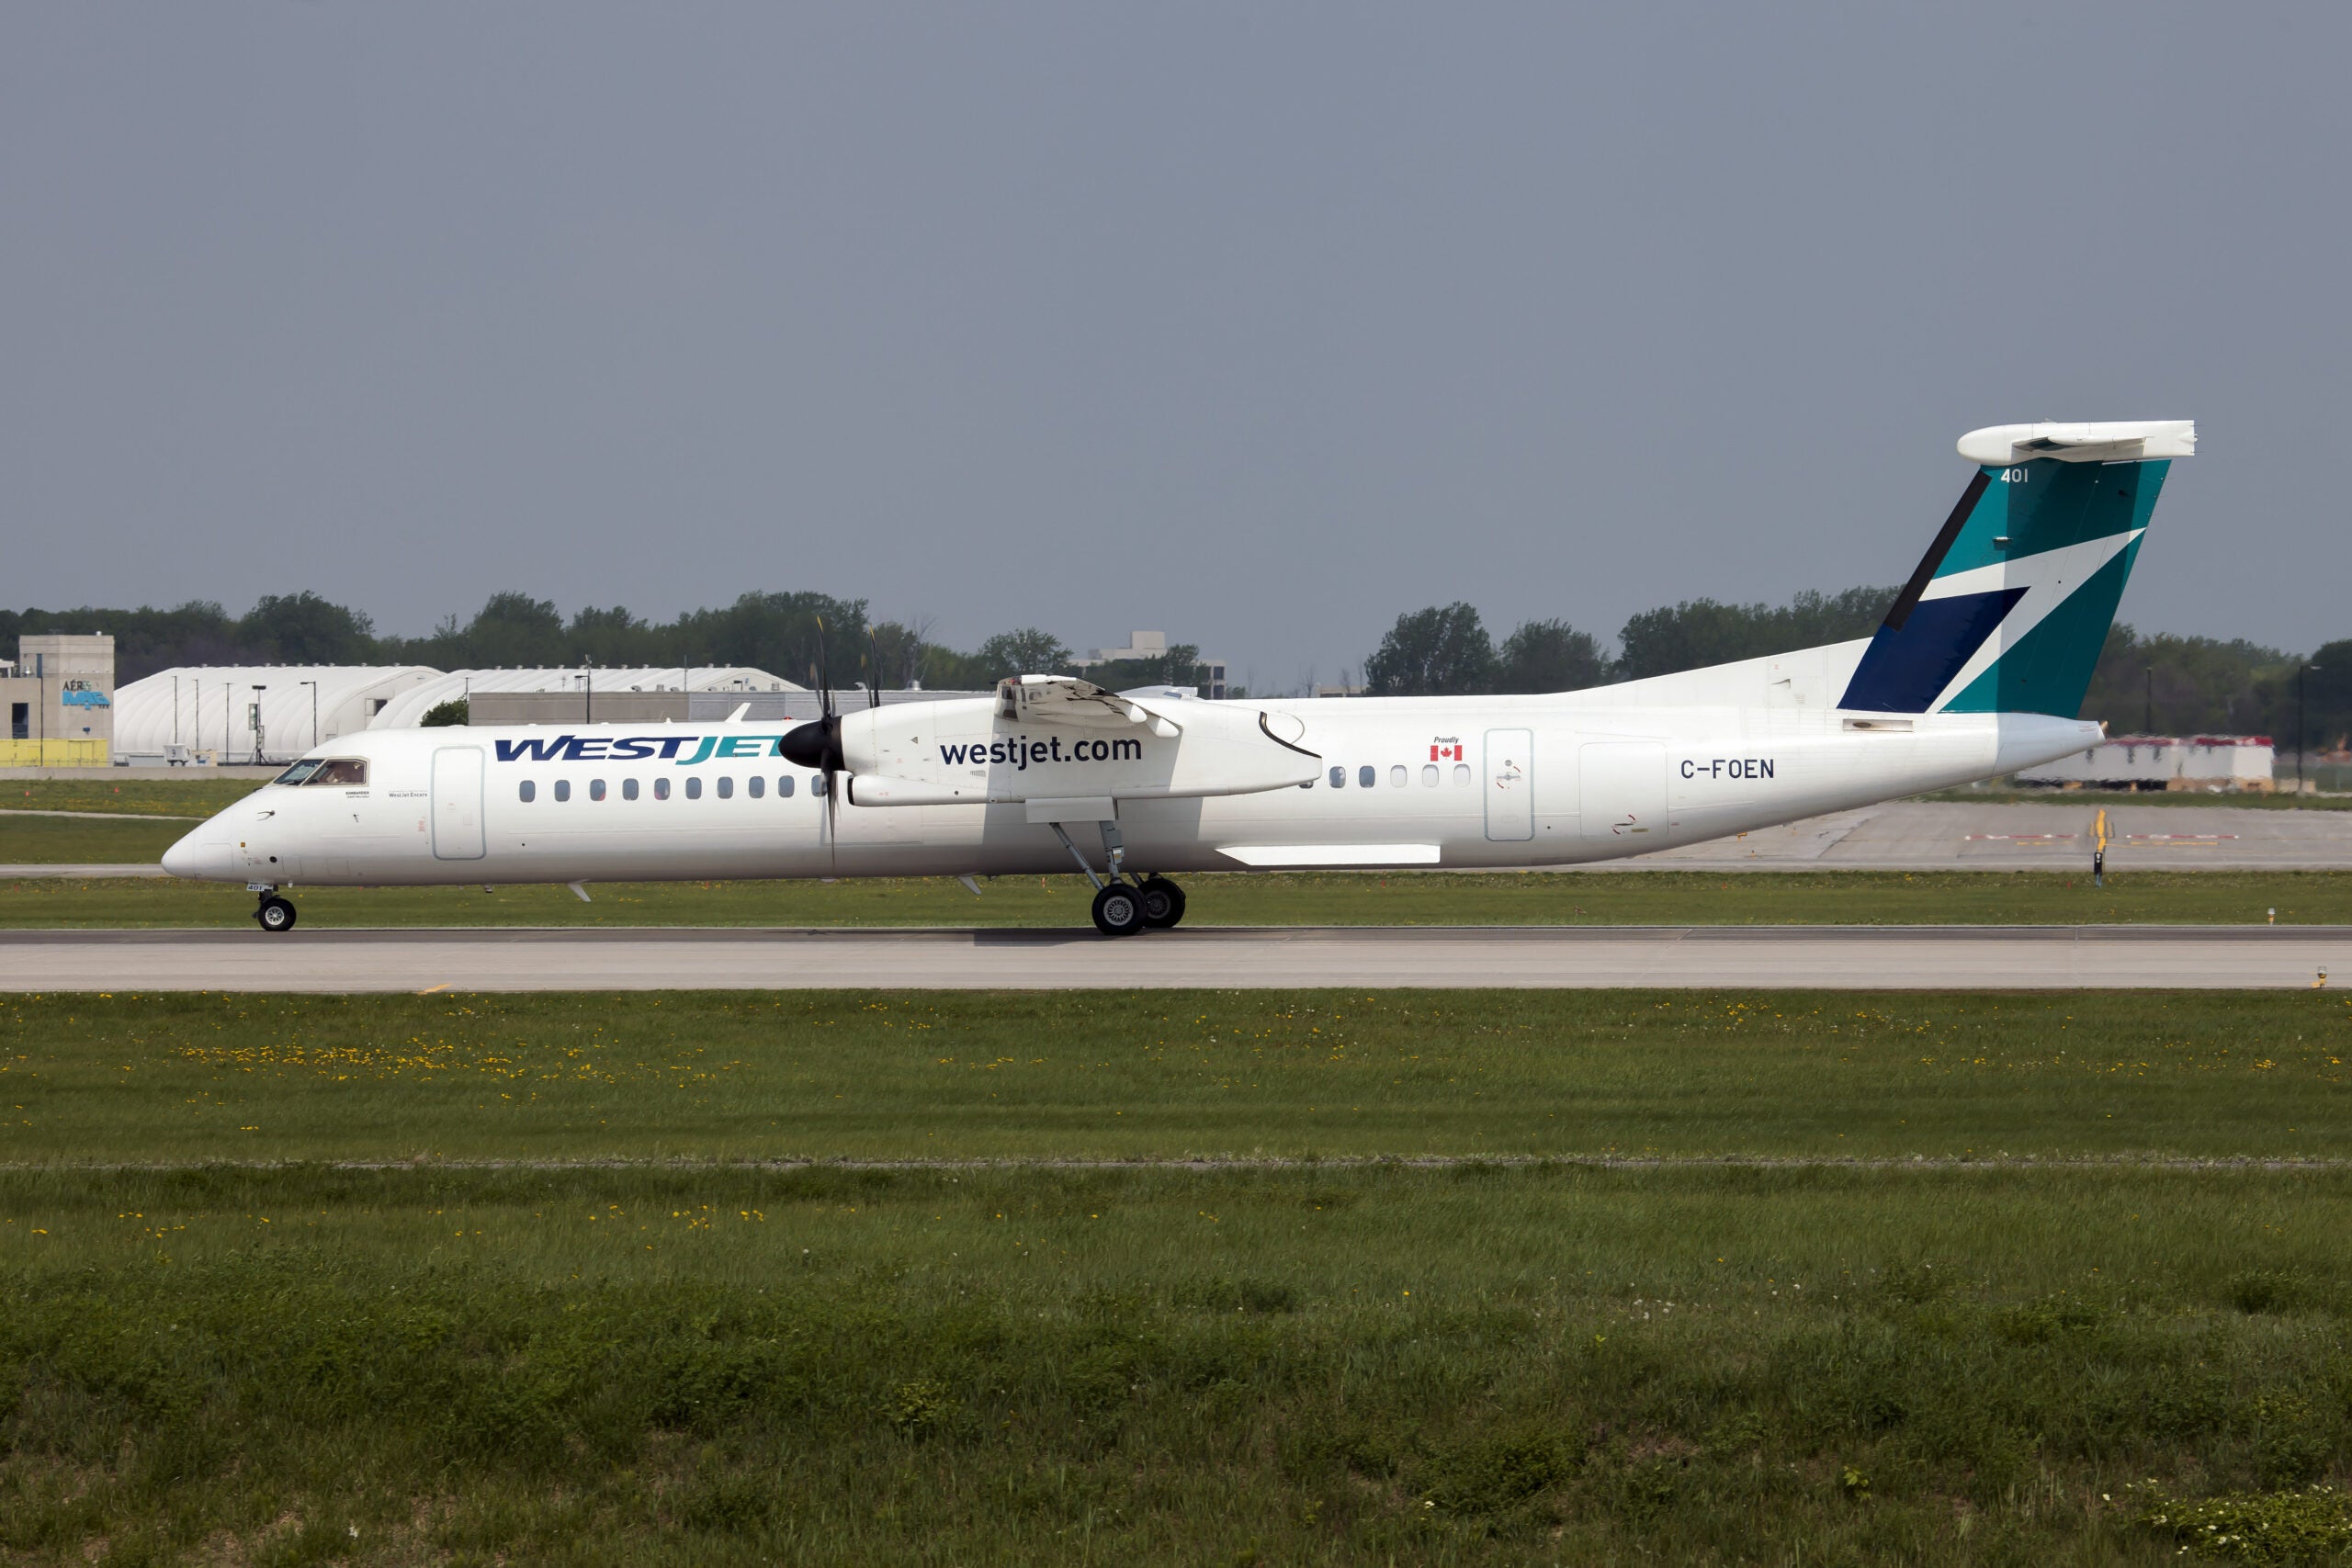 WestJet on X: Today is our 23rd birthday, which means massive